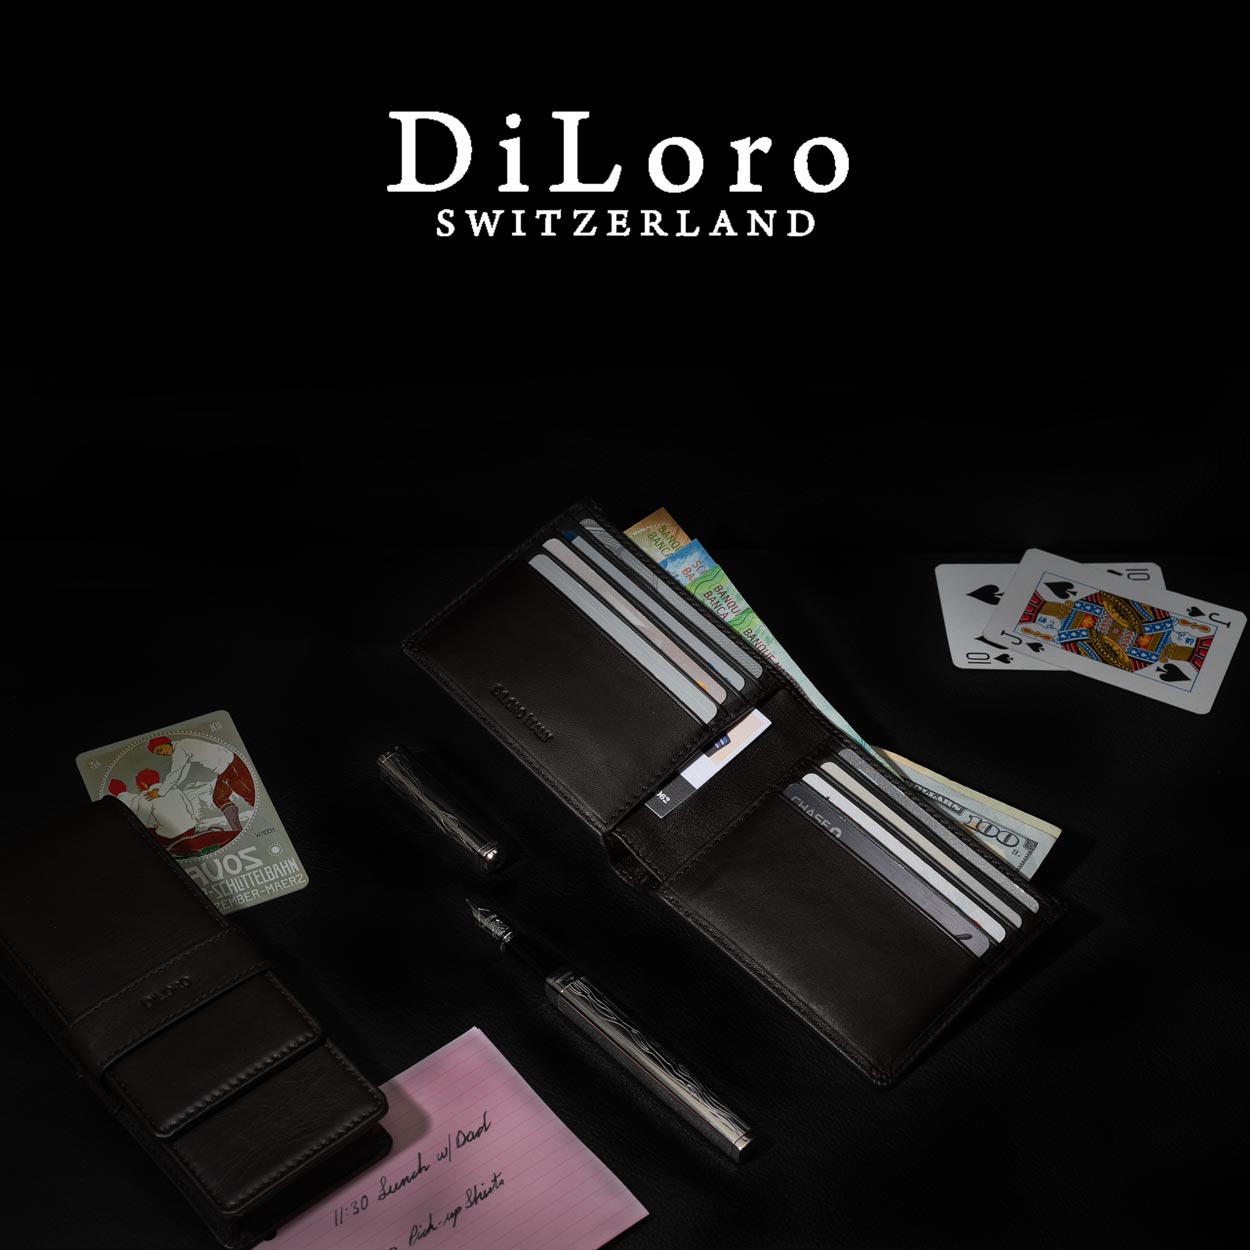 Wallet by DiLoro Italy Genuine Leather Slim Bifold Men's Wallet with RFID Blocking Technology in Dark Brown